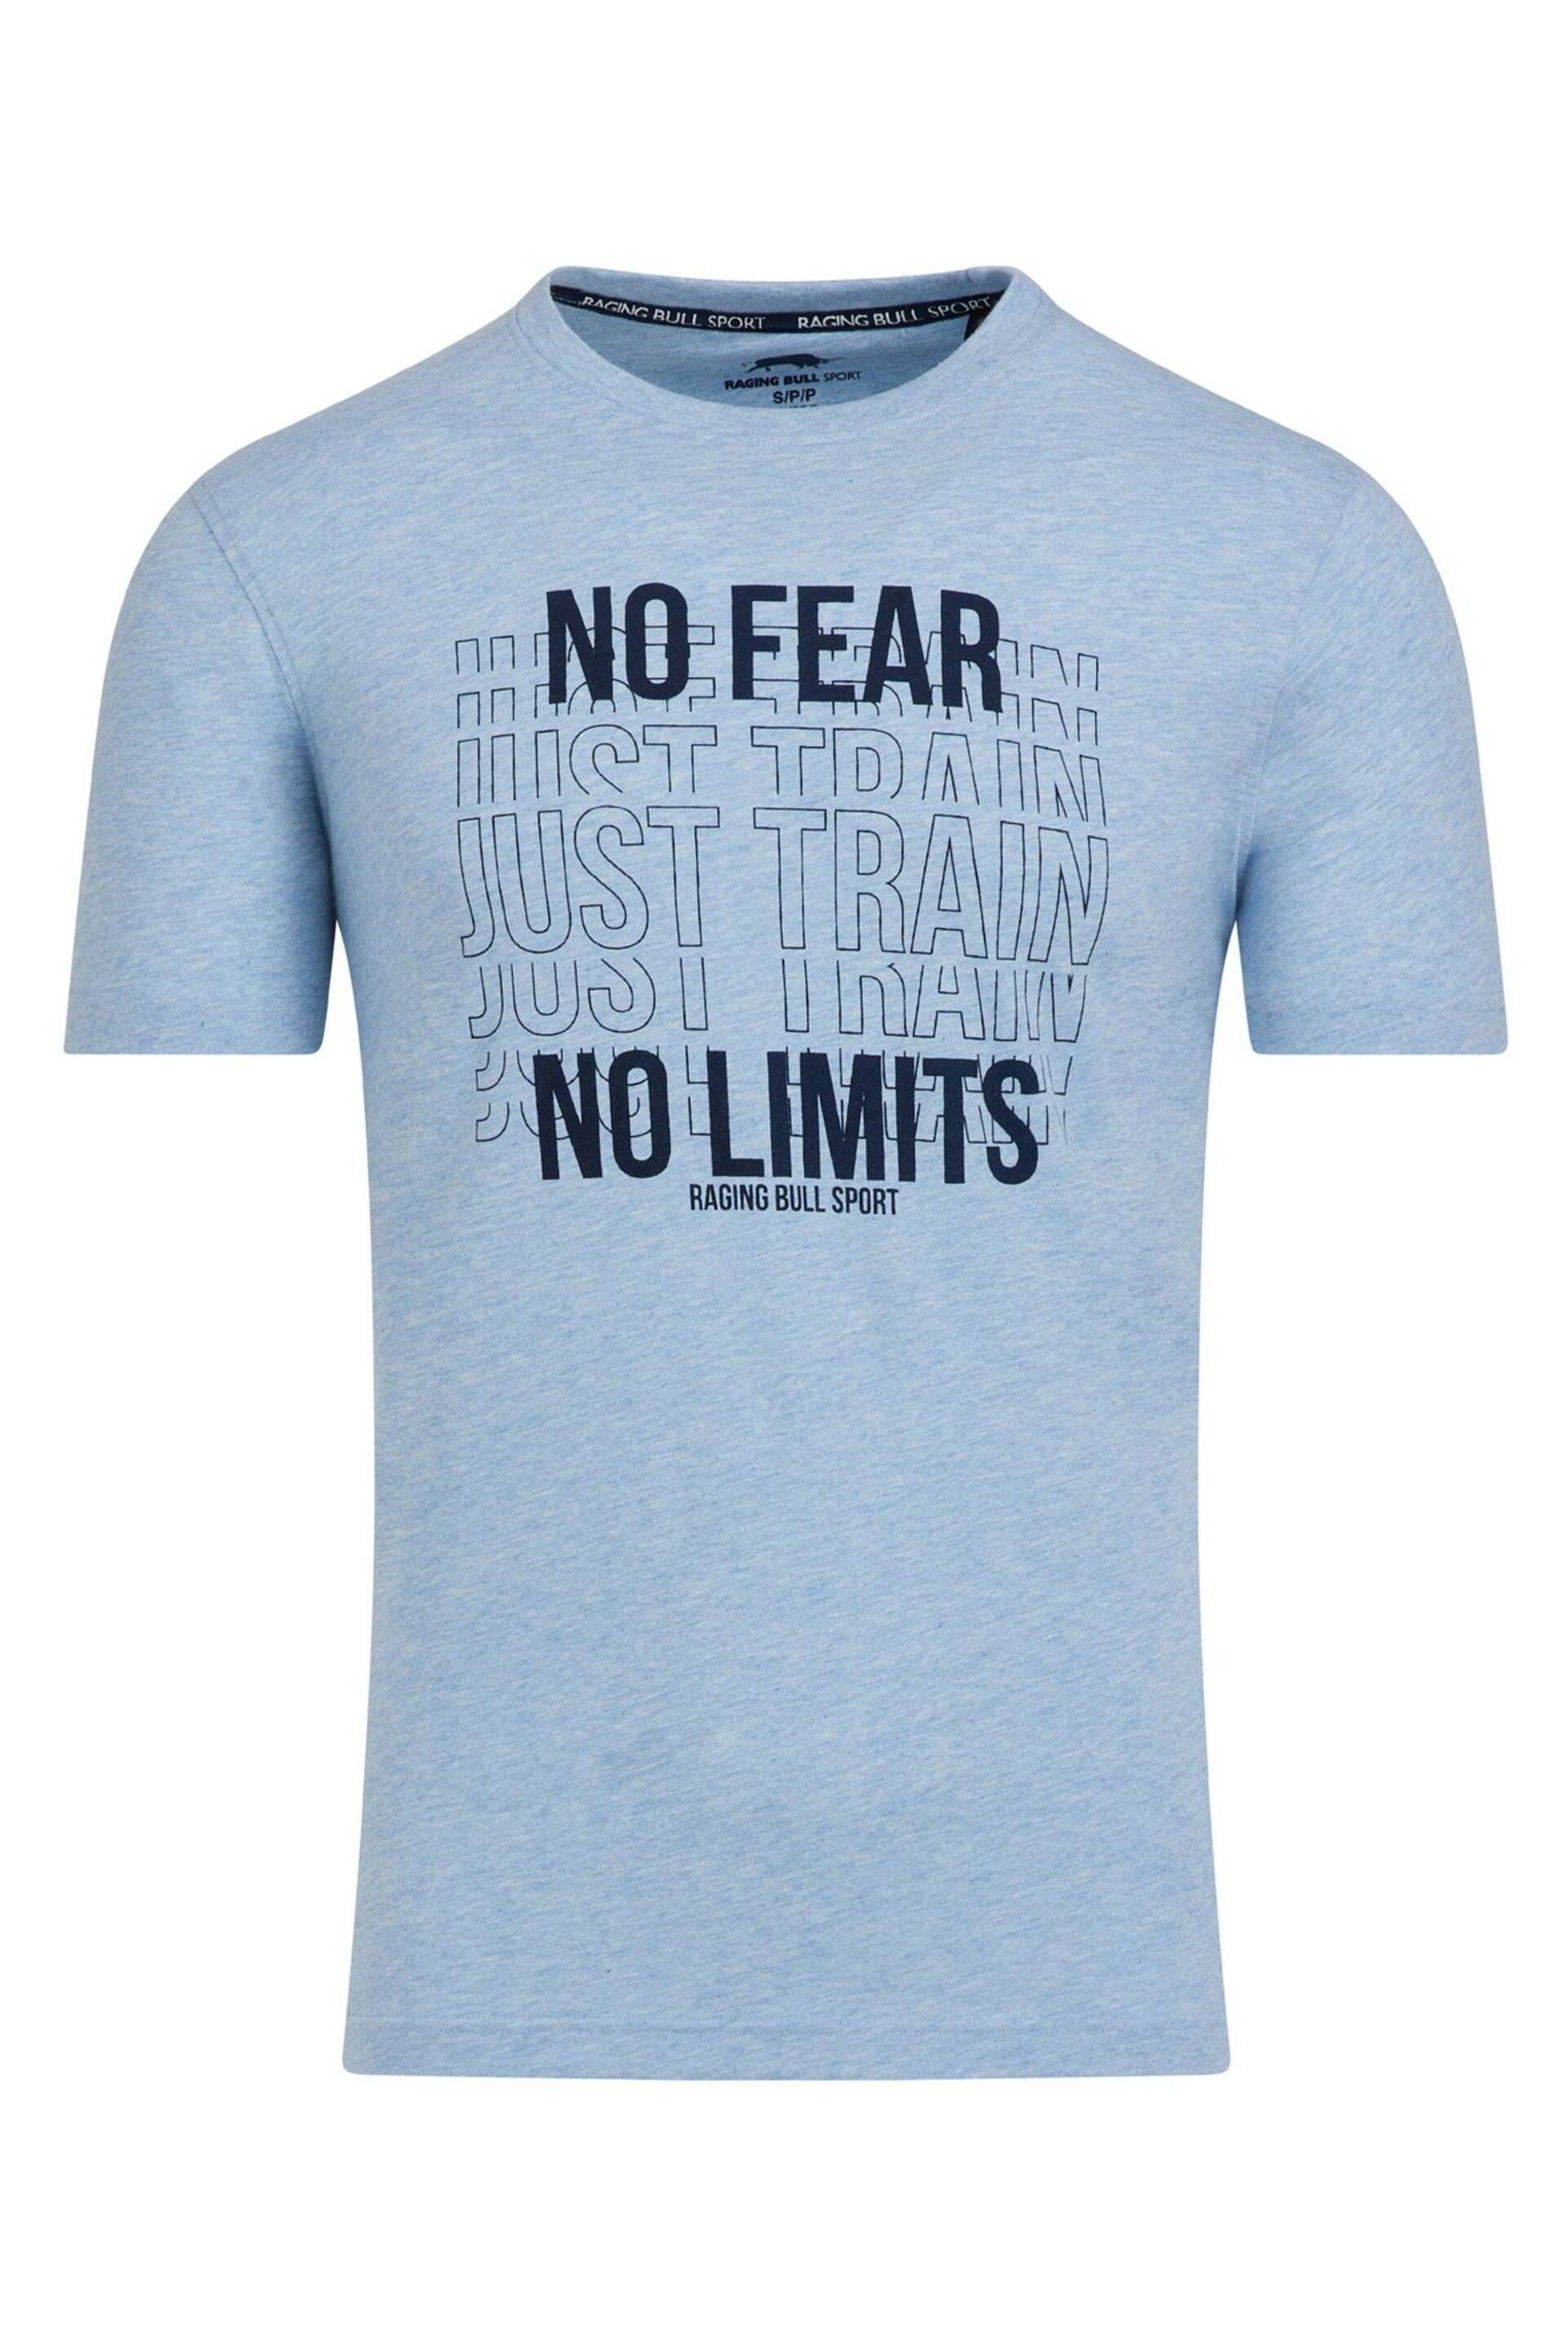 Raging Bull Blue No Fear Just Train T-Shirt - Image 6 of 6